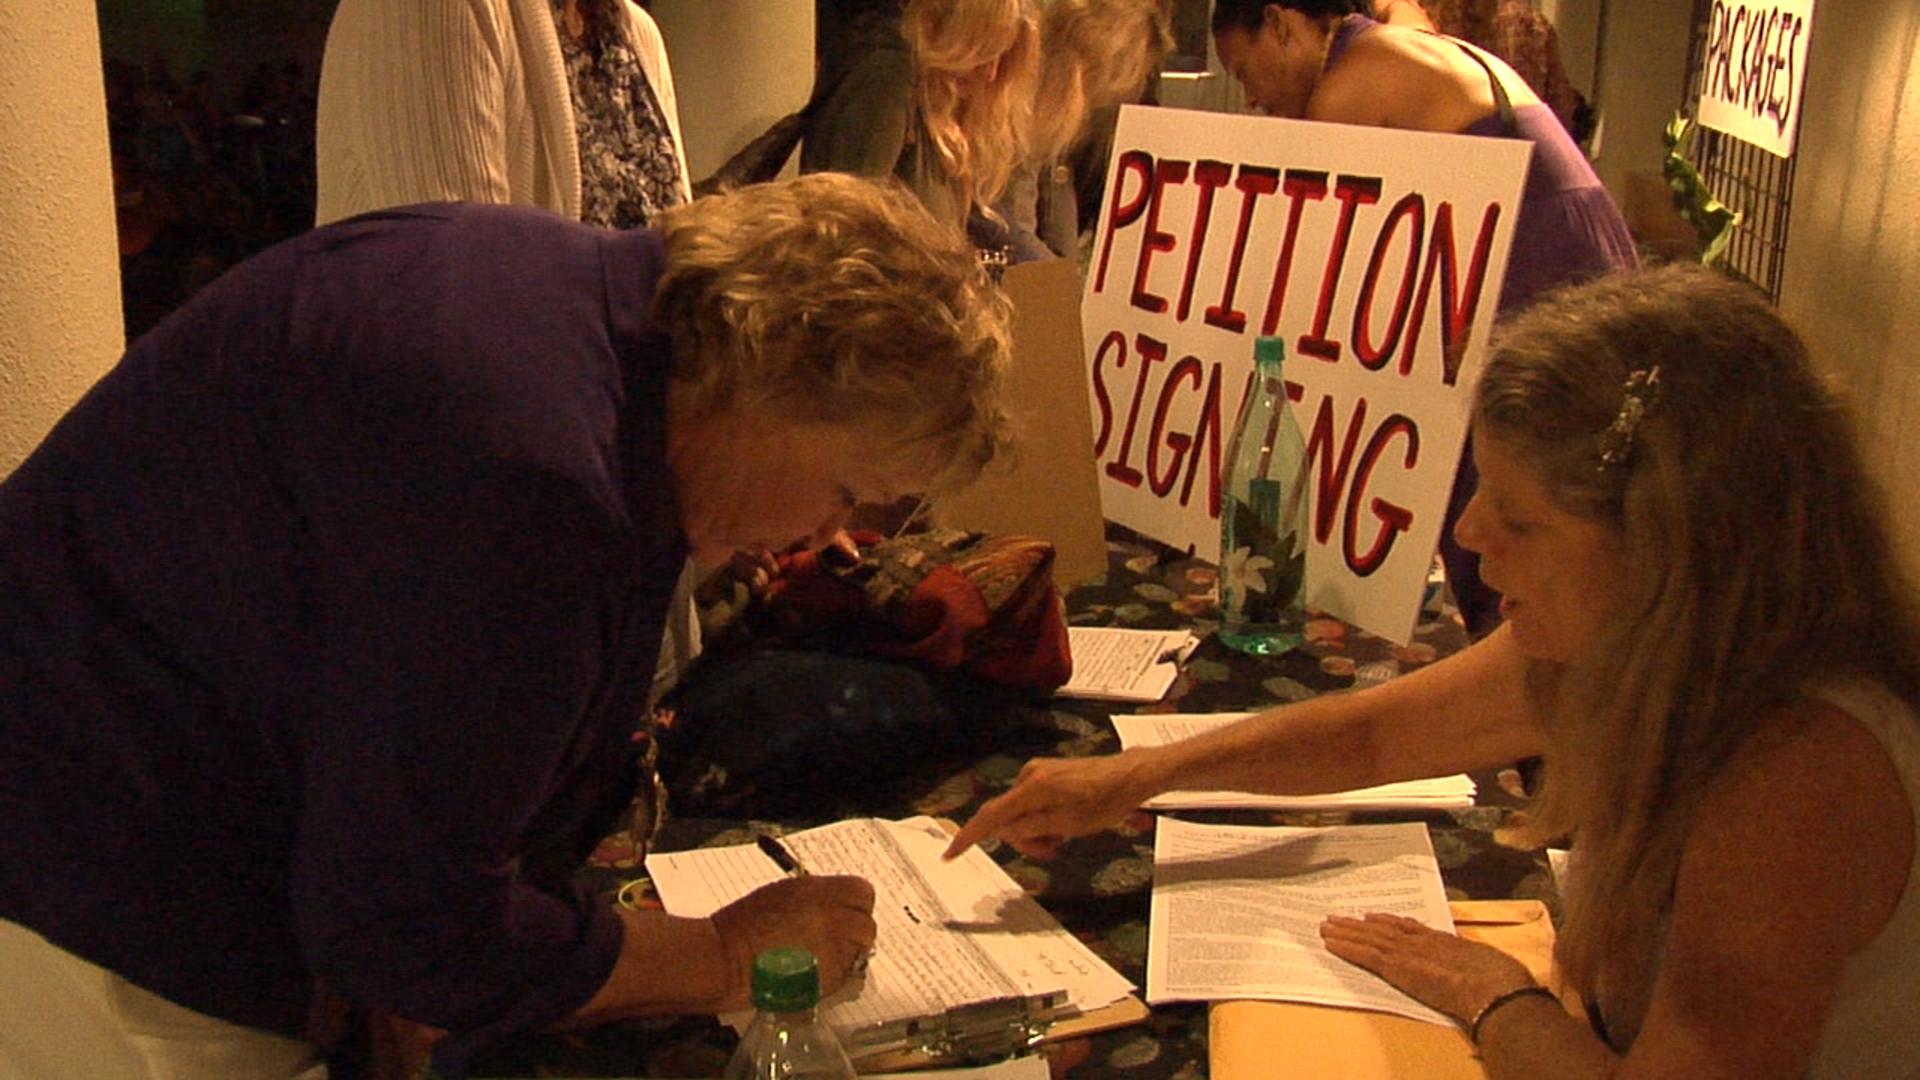 More than 200 people registered to collect signatures and left with petitions in hand, excited to meet the deadline for collecting 8500 registered Maui County voters’ signatures by March 31st.